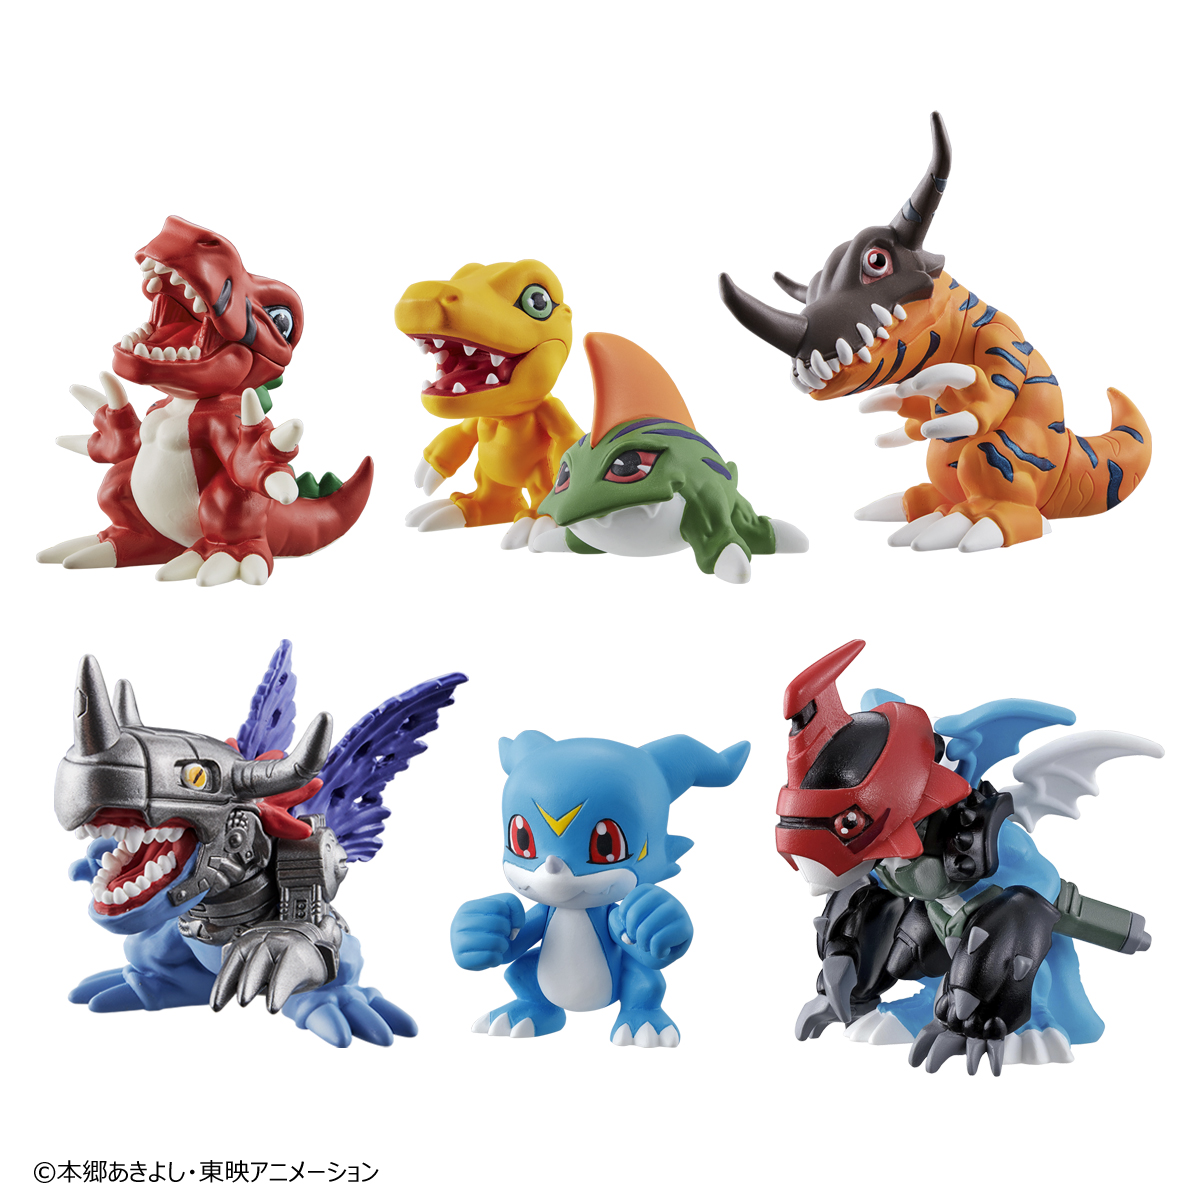 THE DIGIMON NEW COLLECTION Vol.1, DIGIMON